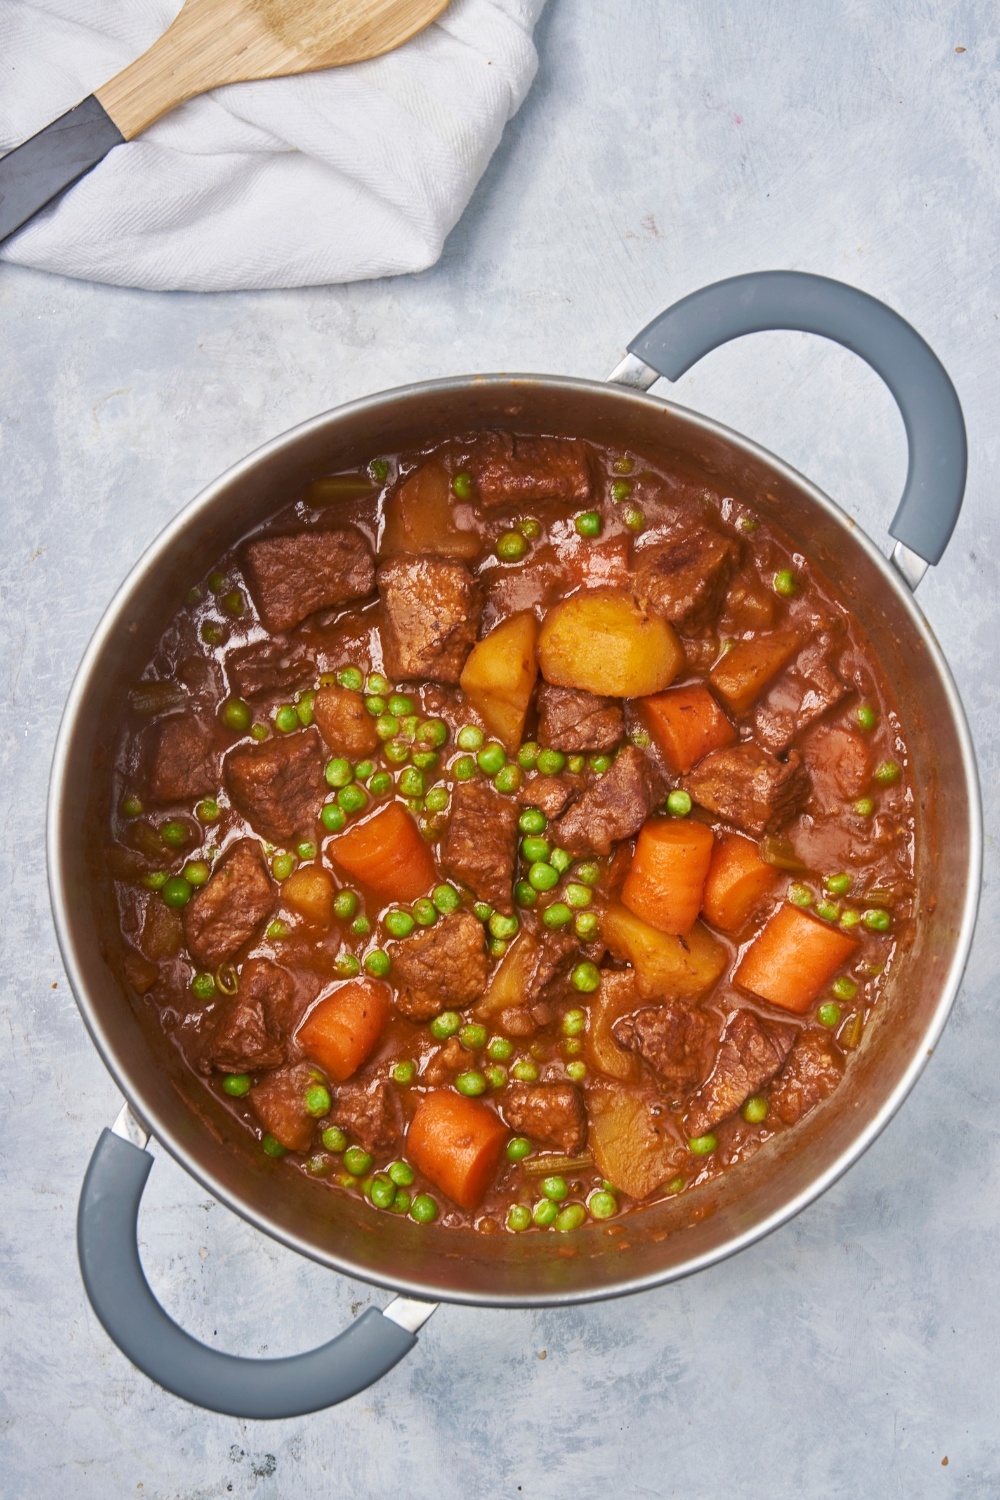 Peas, potatoes, carrots, and stew meat in broth in a pot.